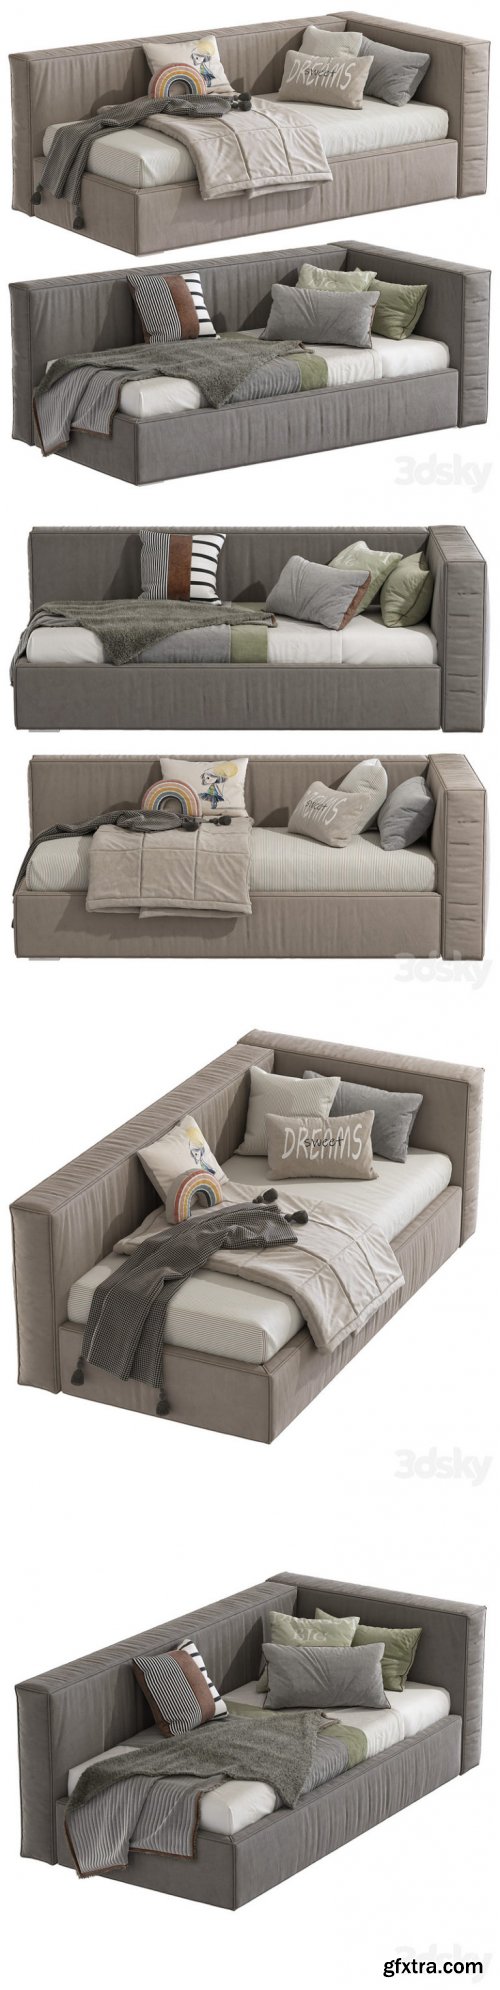 Modern style sofa bed 281